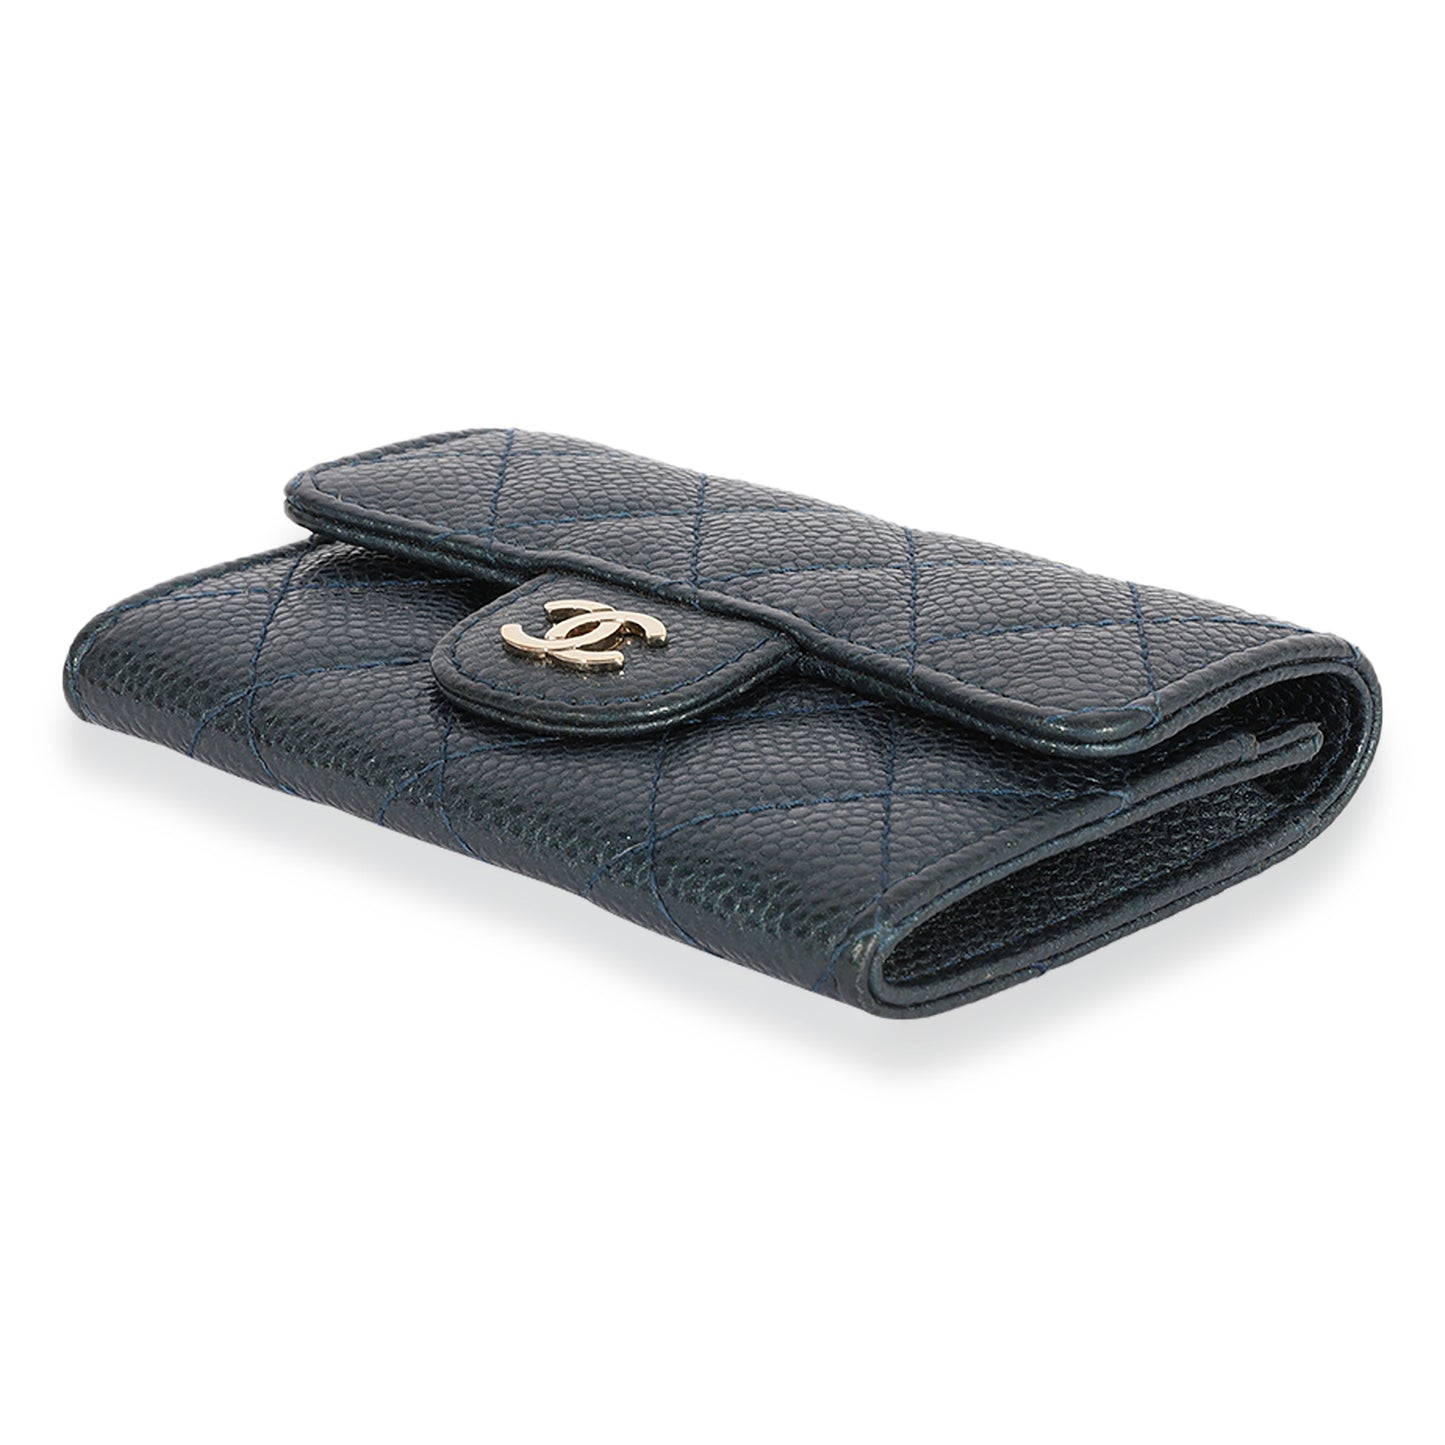 CHANEL - Blue Quilted Caviar Flap Card Holder Wallet